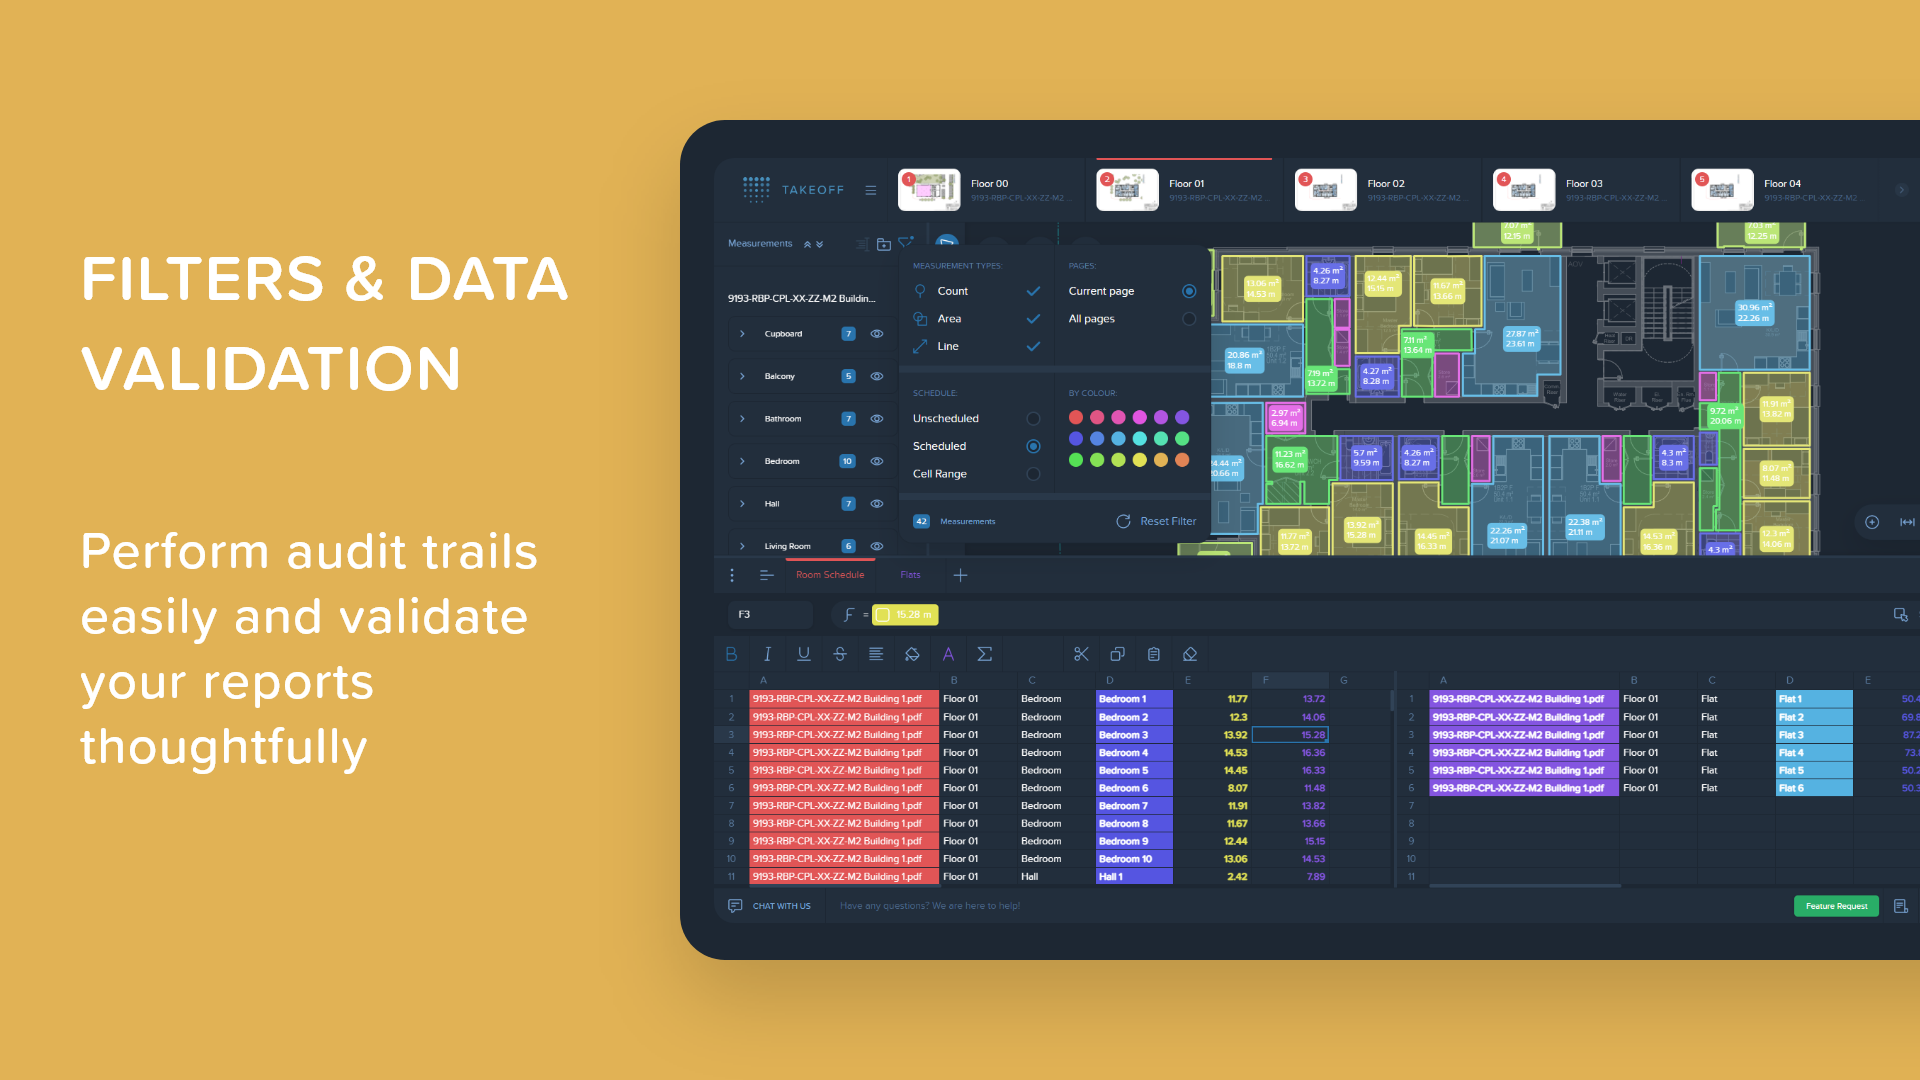 Perform audit trails easily and validate your reports thoughtfully